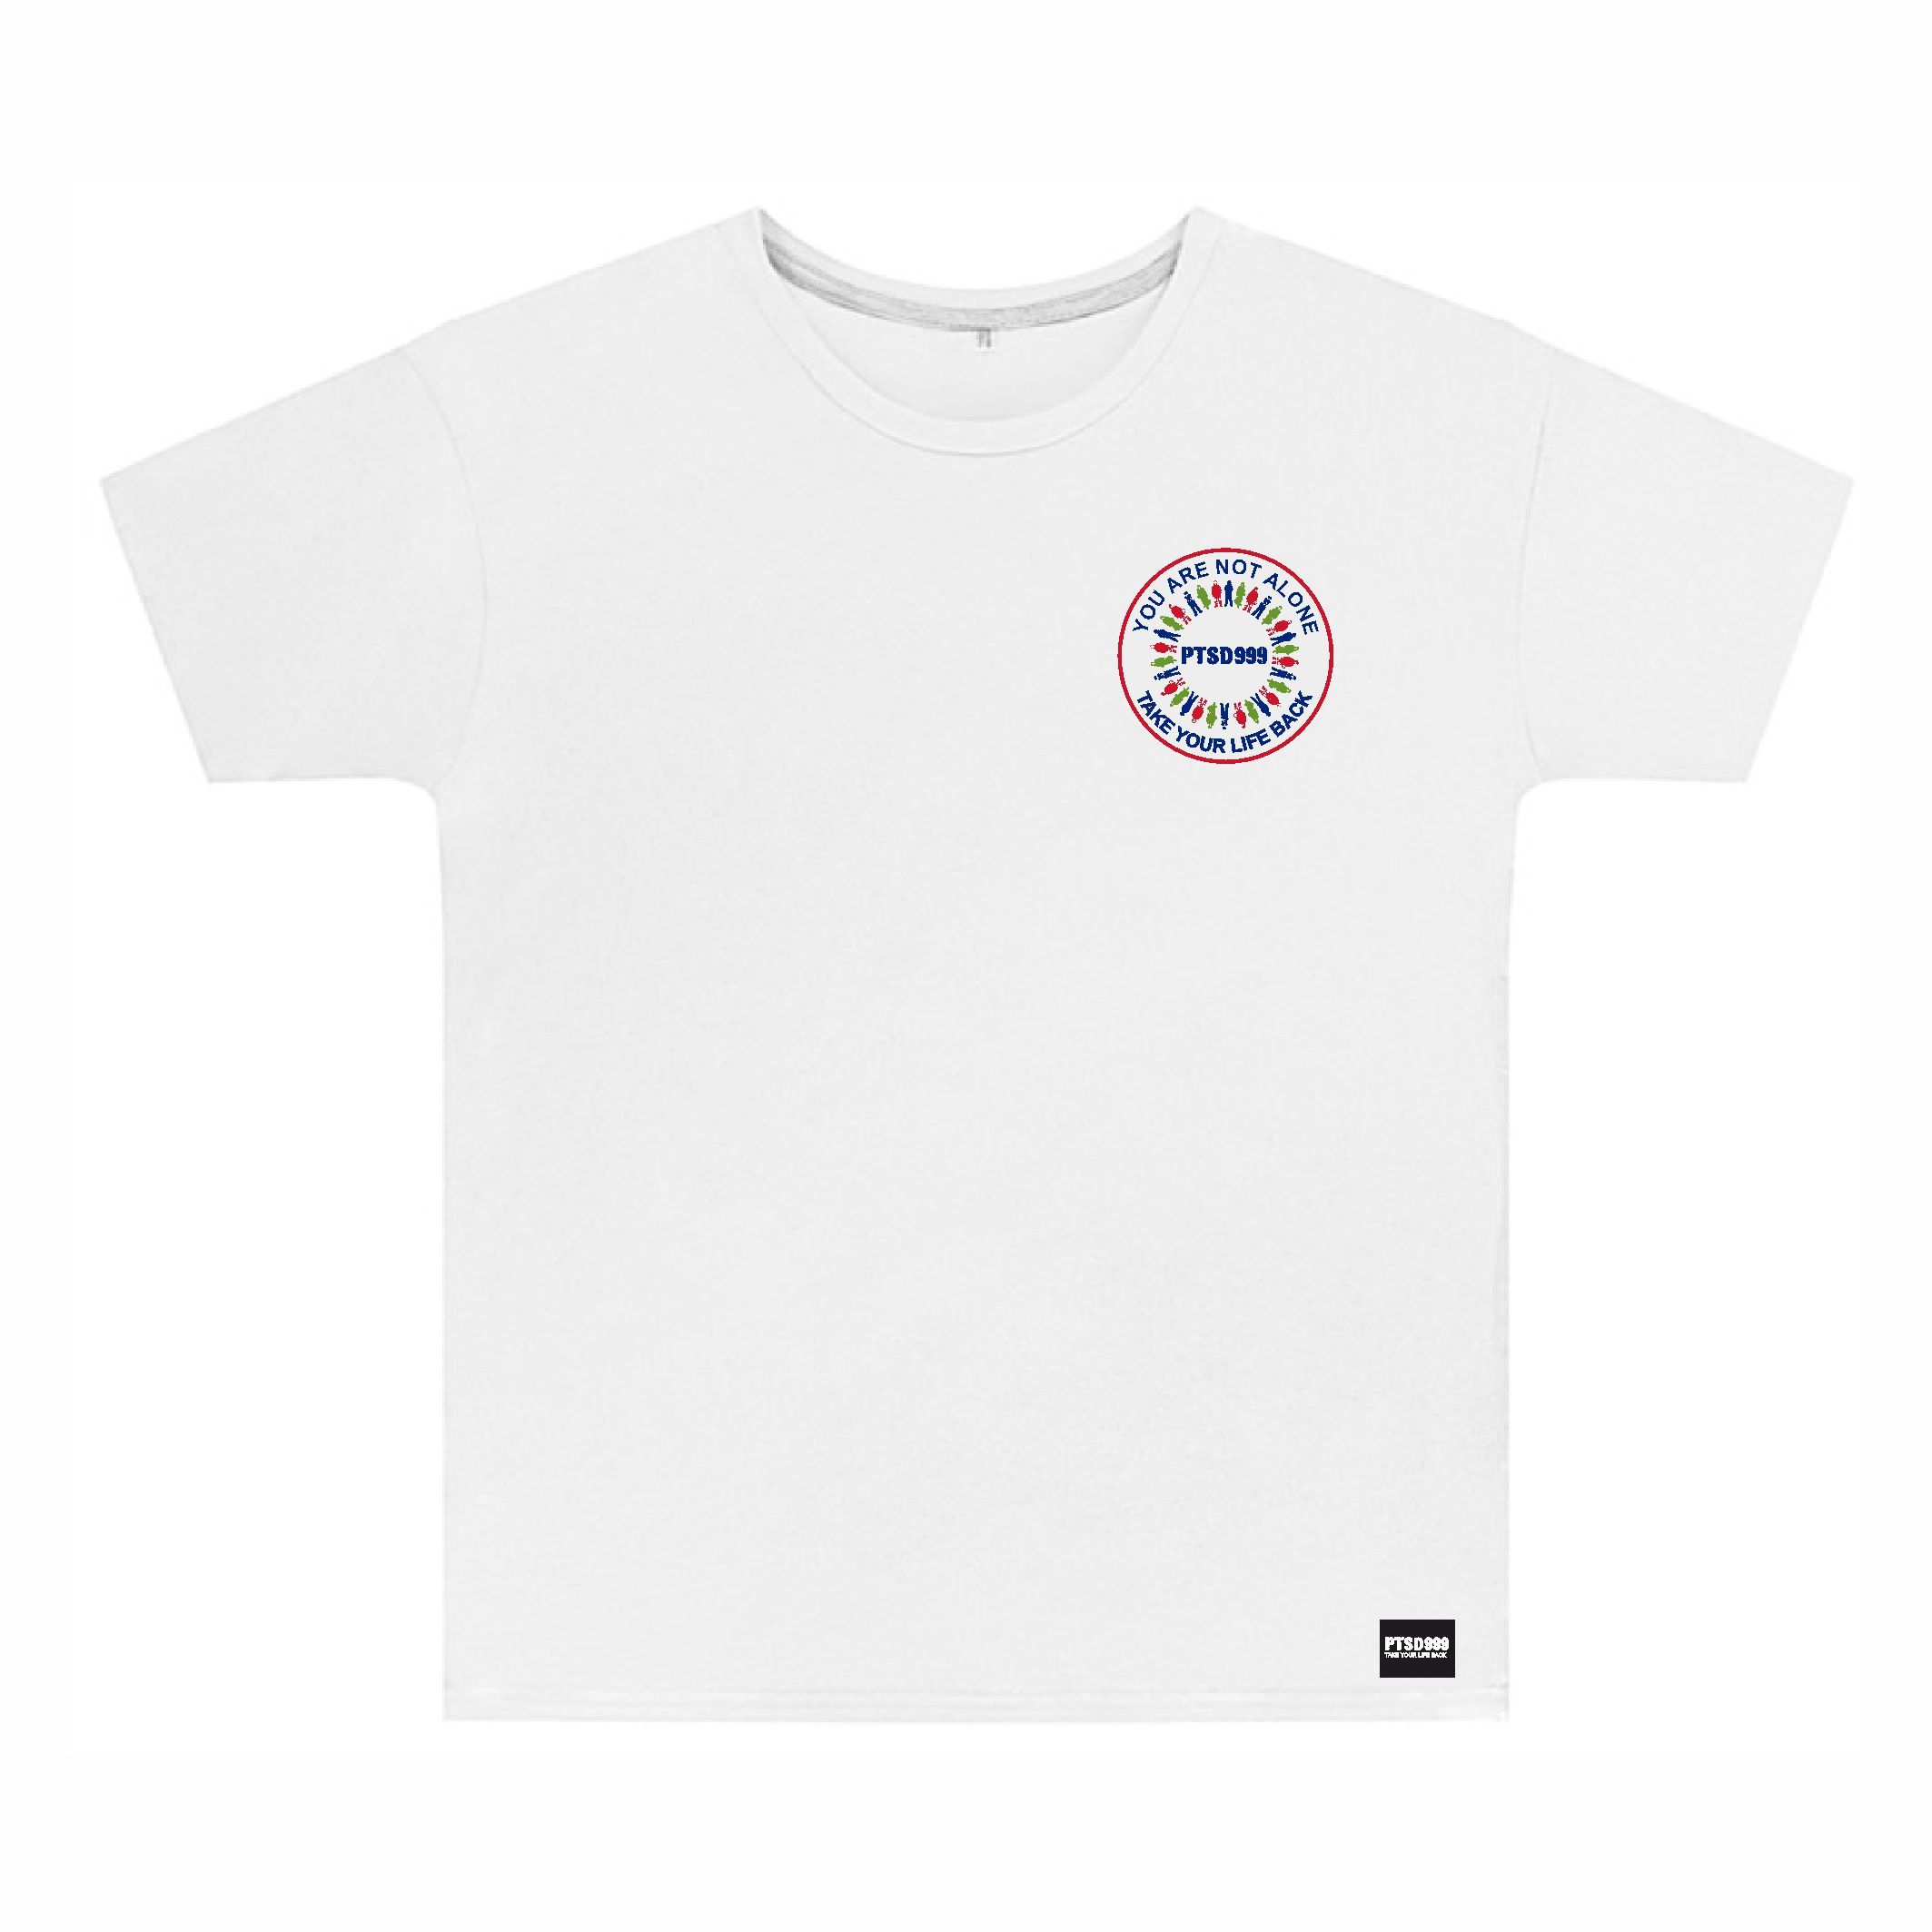 PTSD999- 'You Are Not Alone' Kids Tee